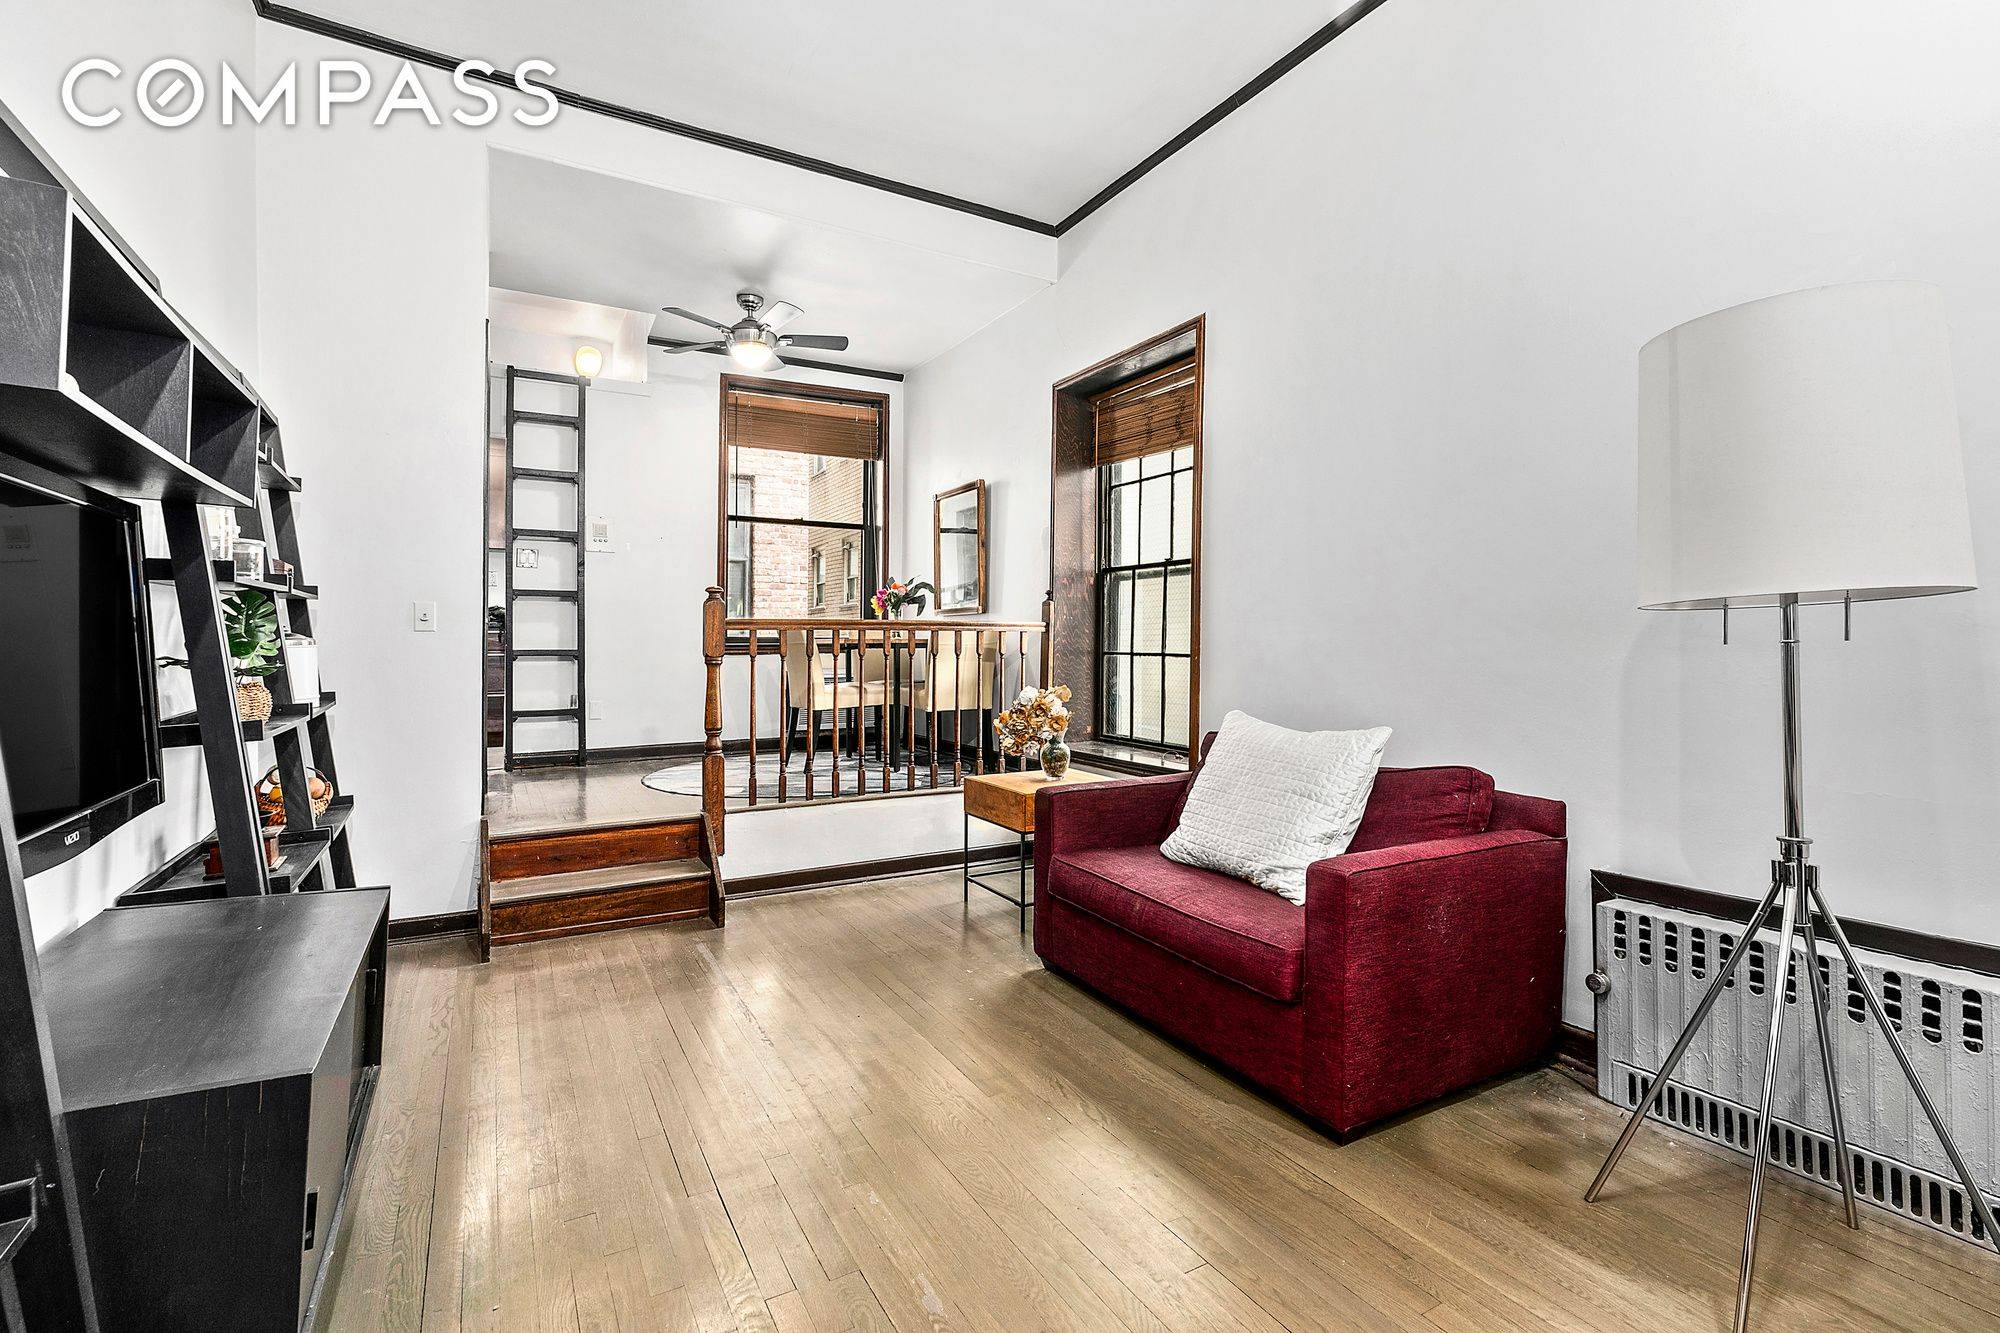 Situated in one of the most coveted neighborhoods on the Upper West side of Manhattan, 2 West 90th Street, Unit 3C, is a charming and unique, 1 bedroom, 1 bath.